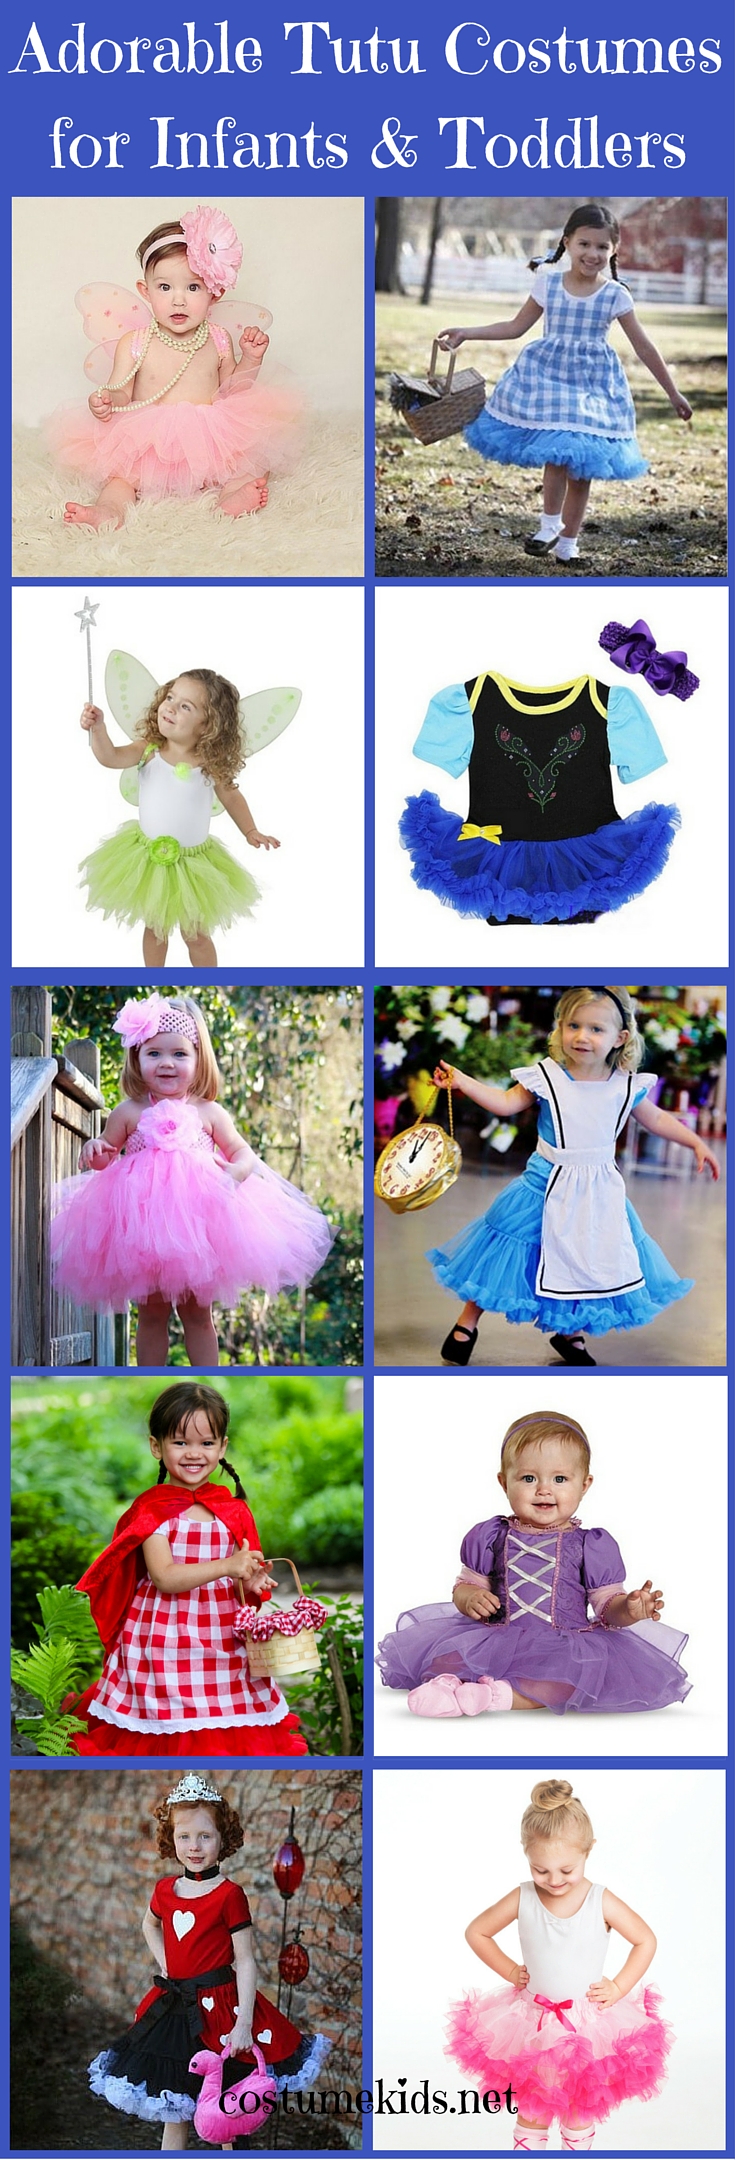 Adorable Tutu Costumes for Infants and Toddlers